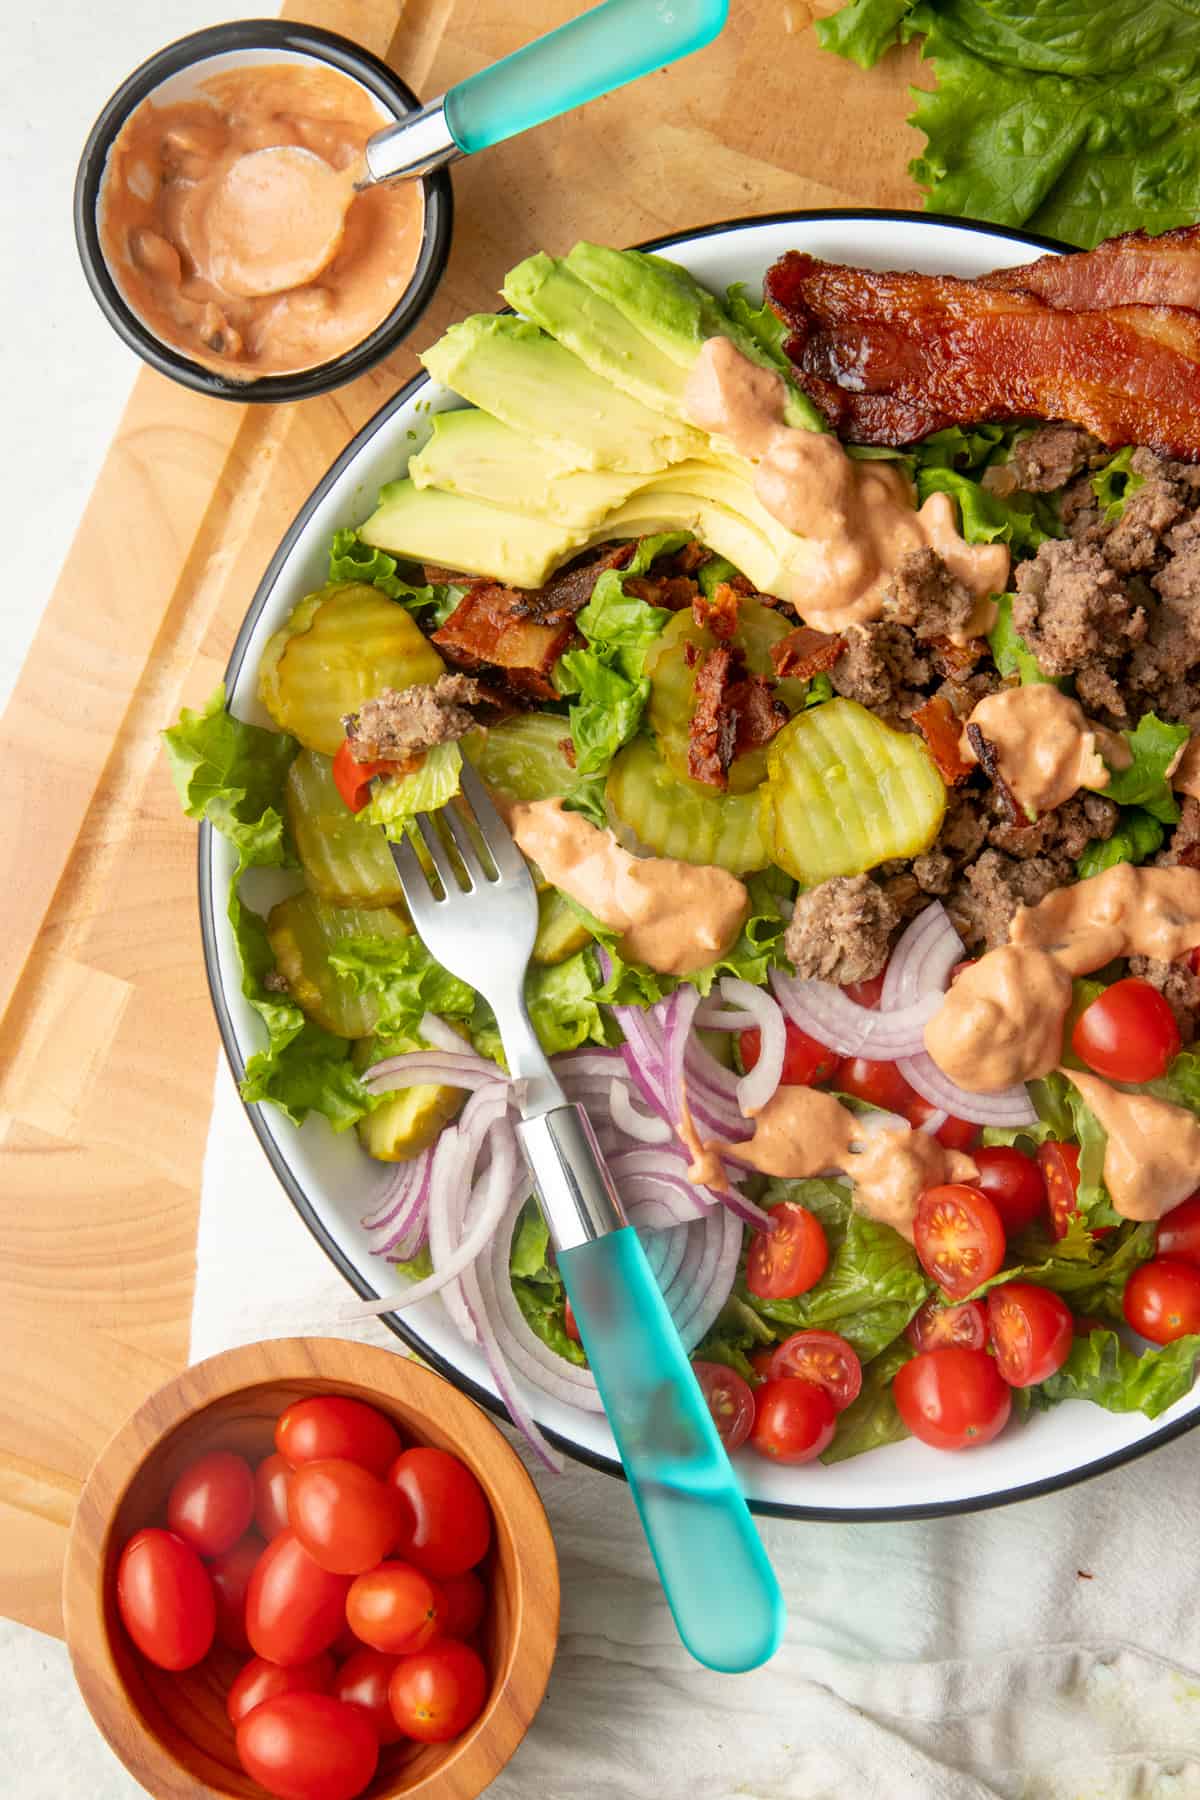 A fork with a blue handle rests in a large bowl filled with burger salad ingredients.